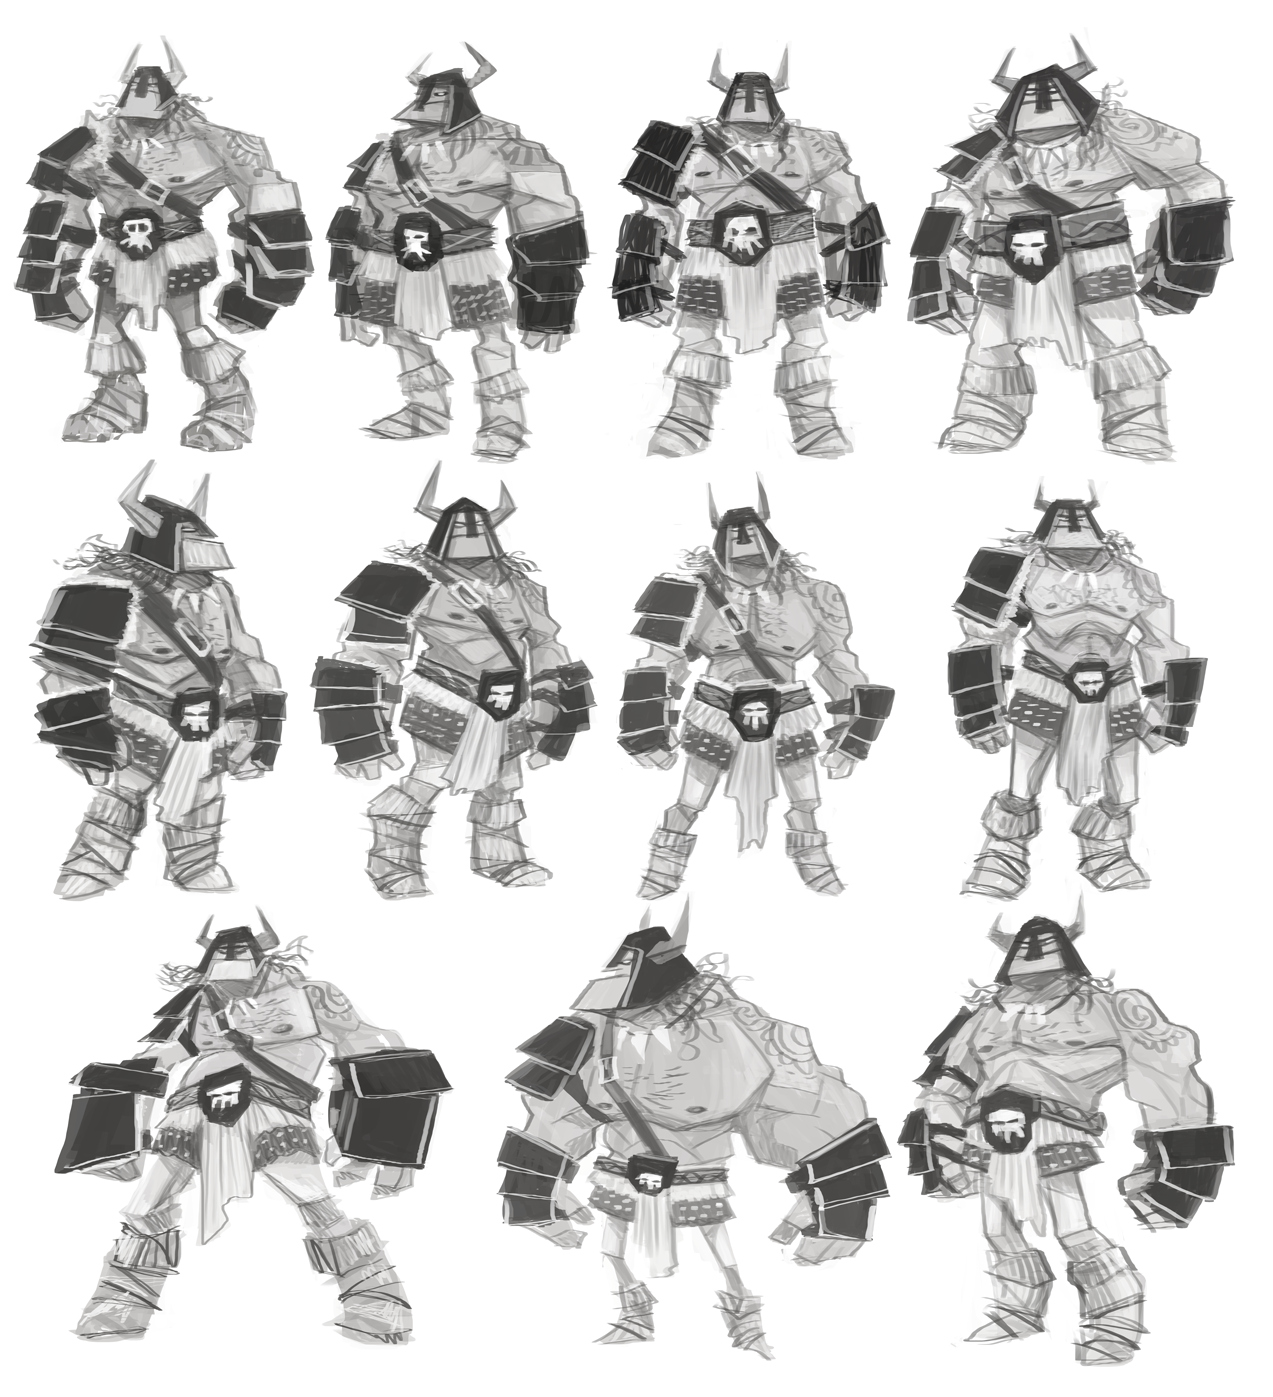 'Boss' initial character sketches